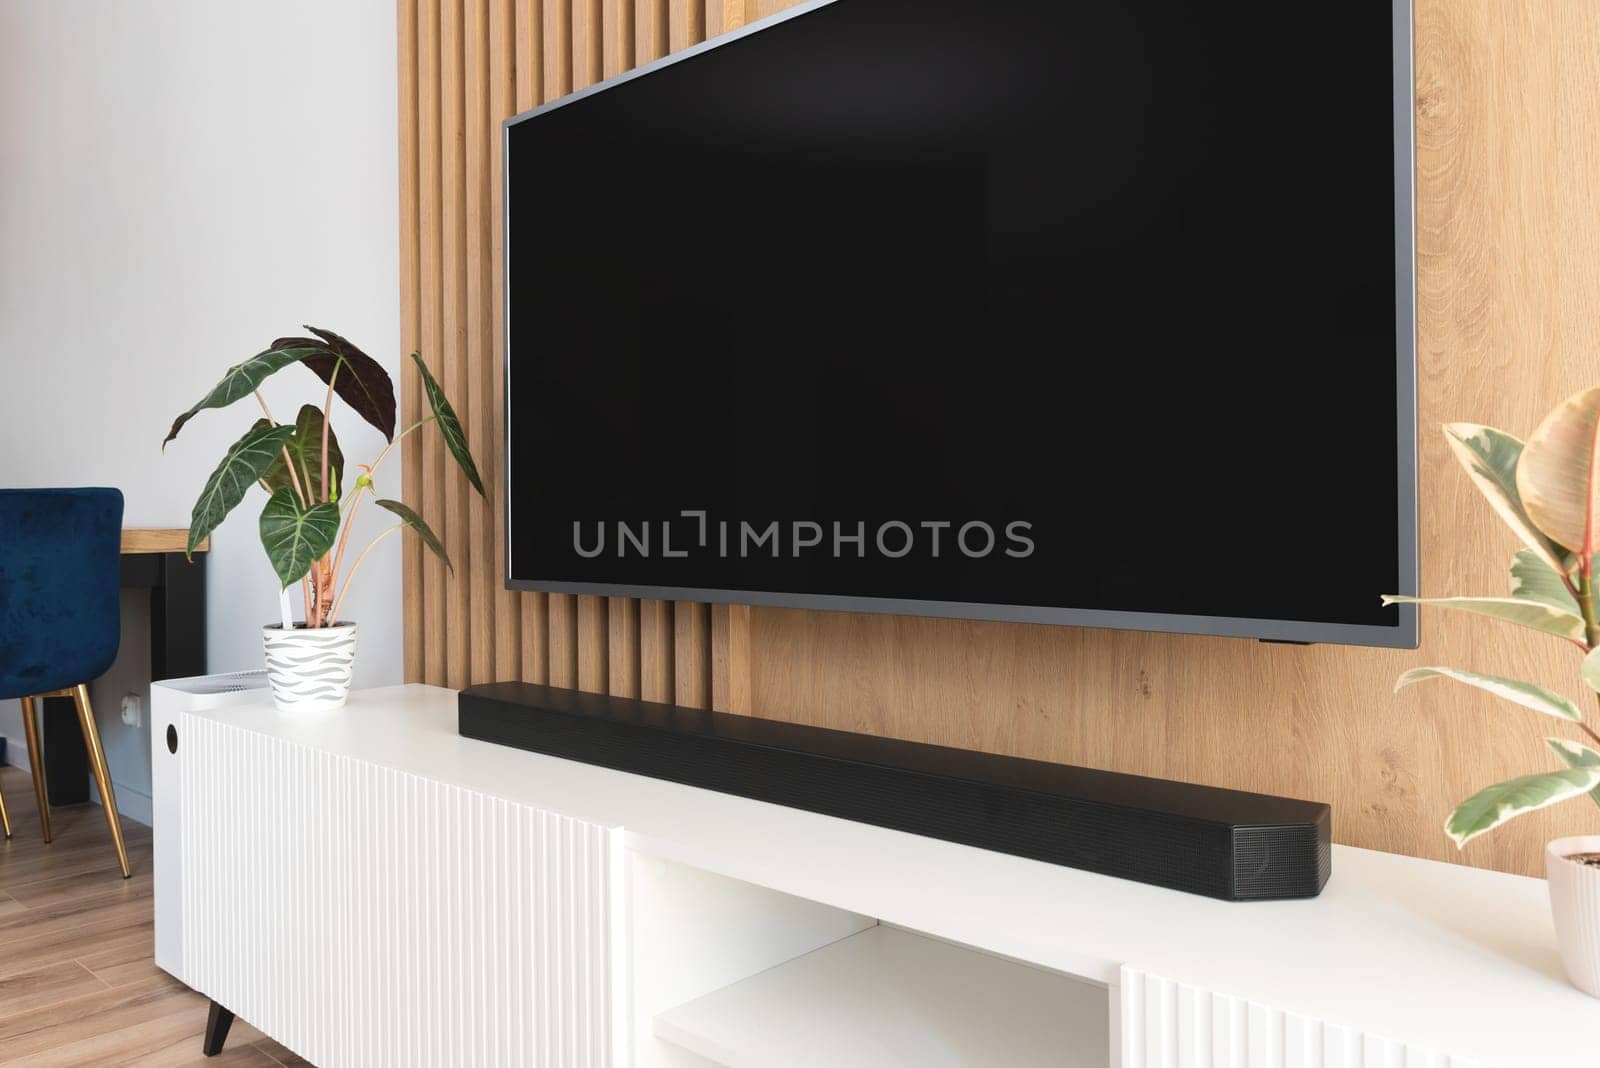 Soundbar in a modern home. Listening to music by simpson33